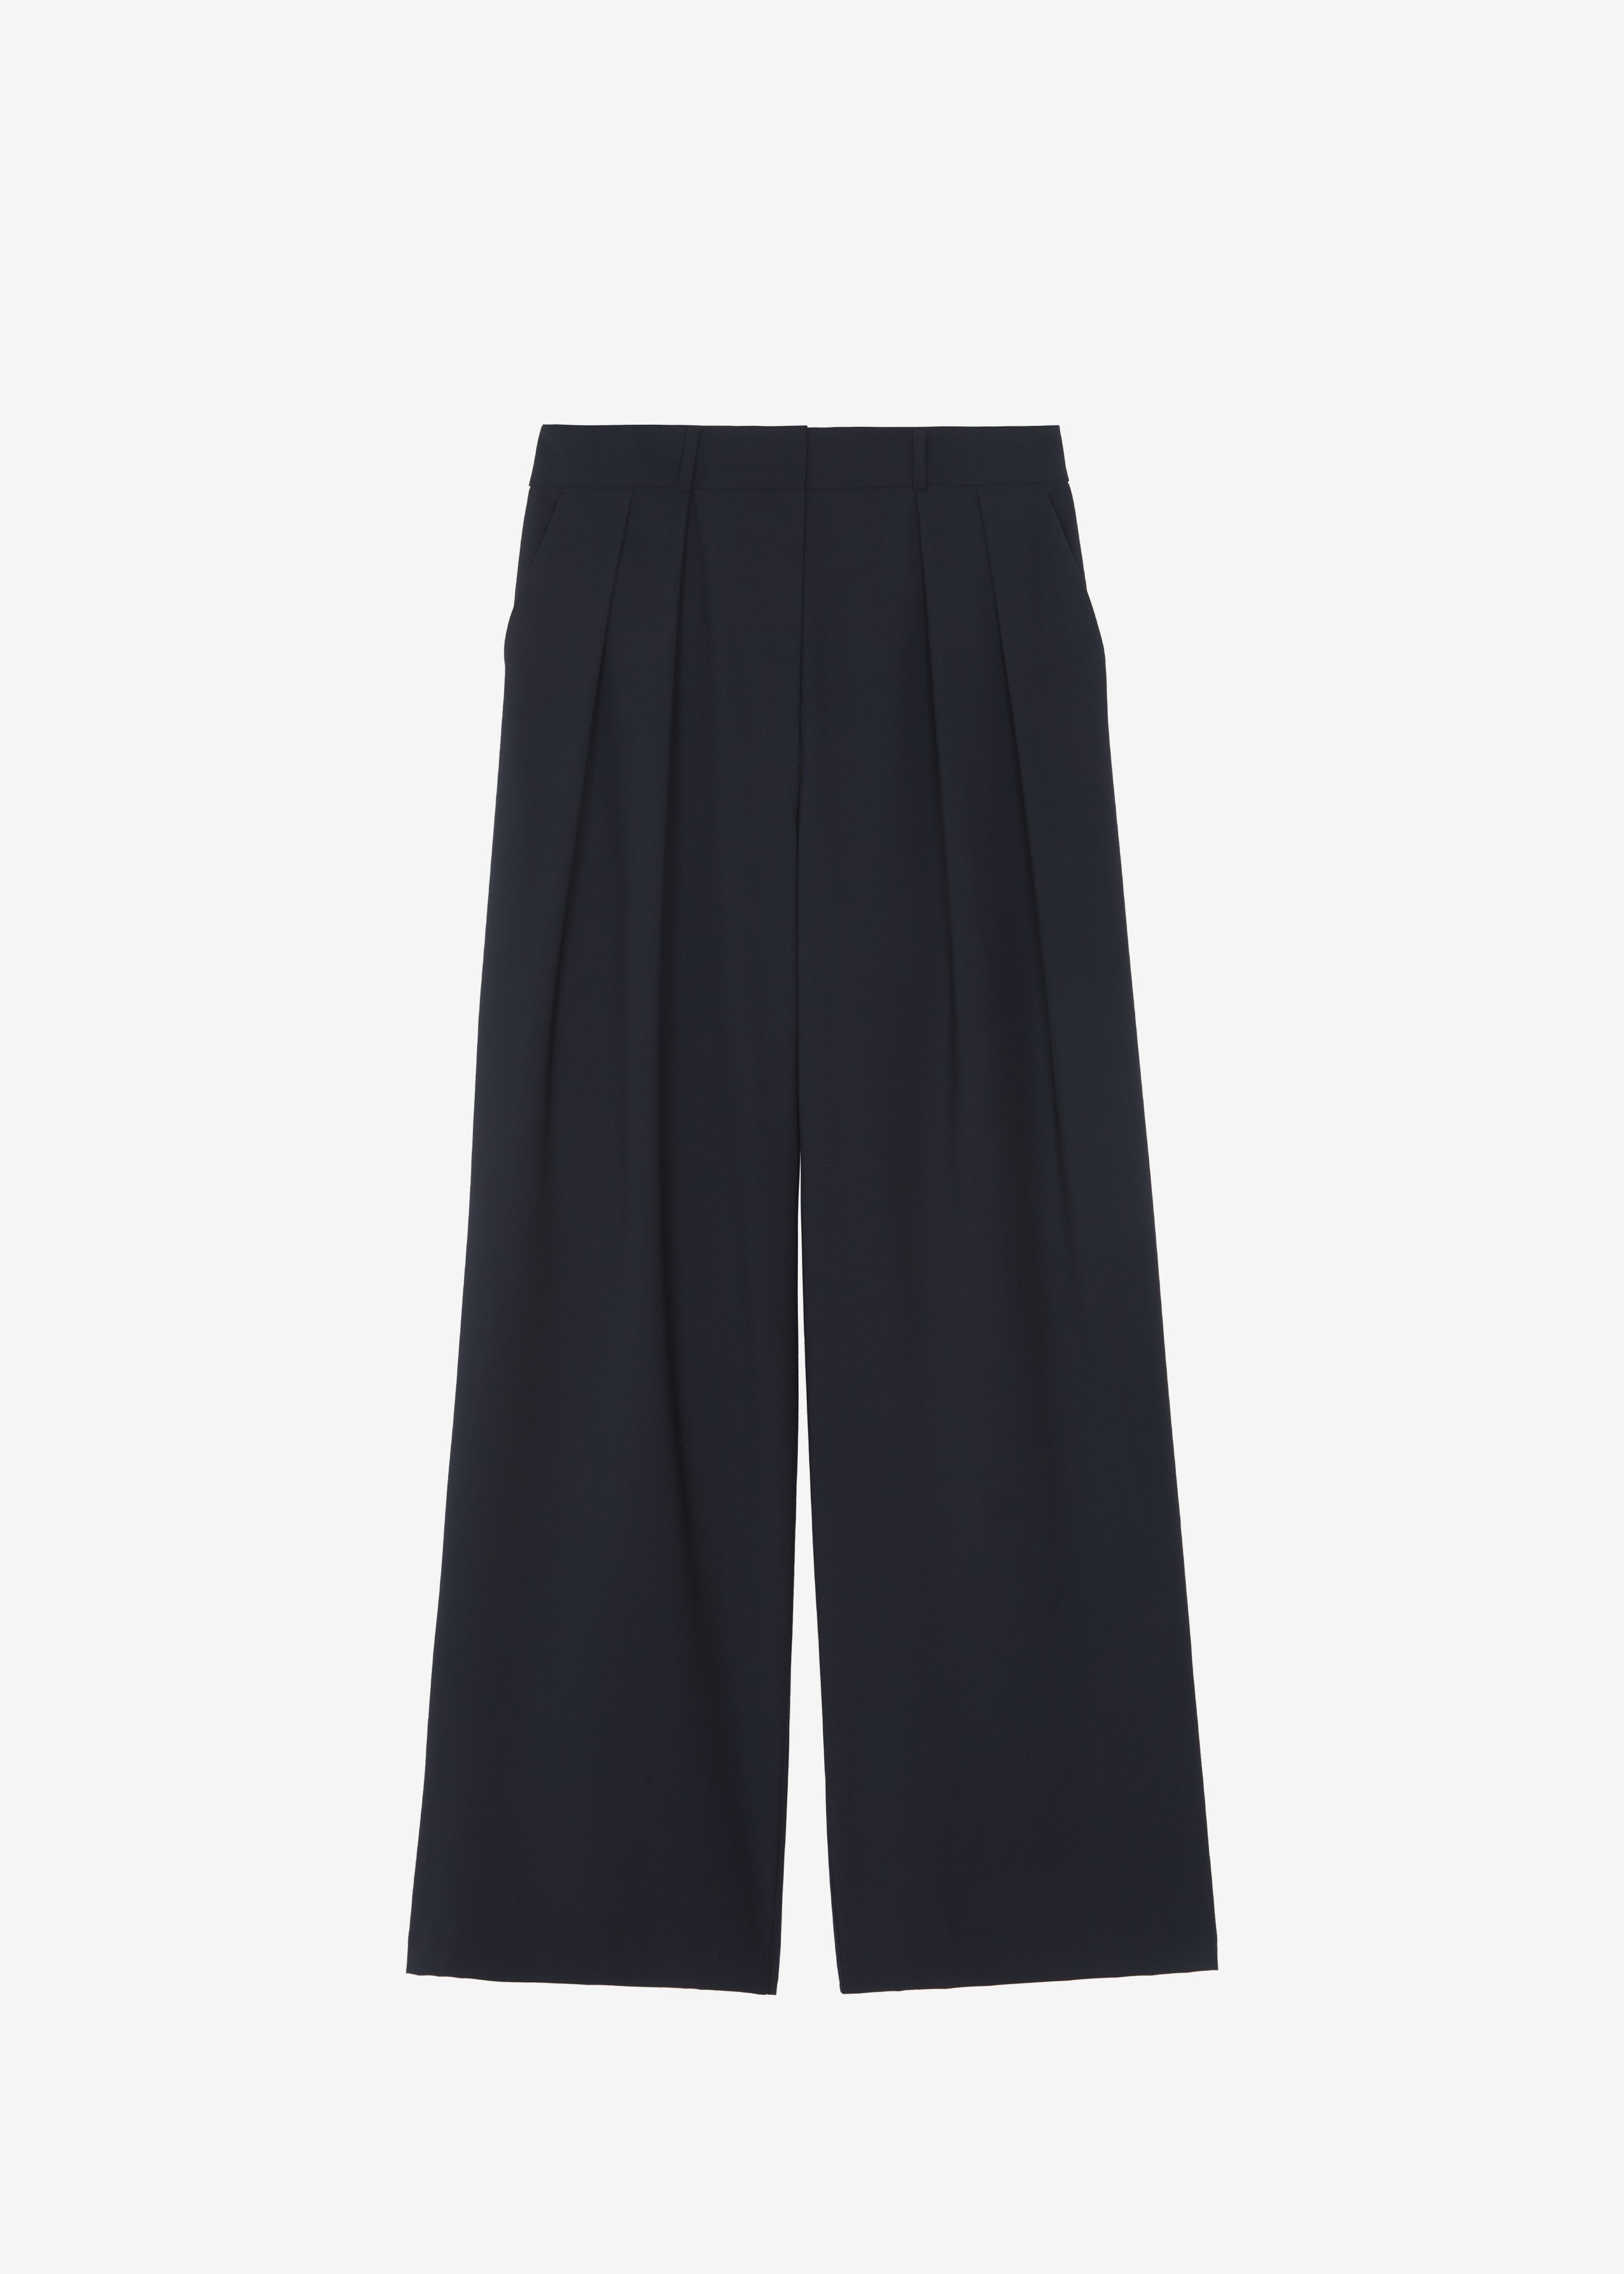 Ripley Pleated Trousers - Navy - 7